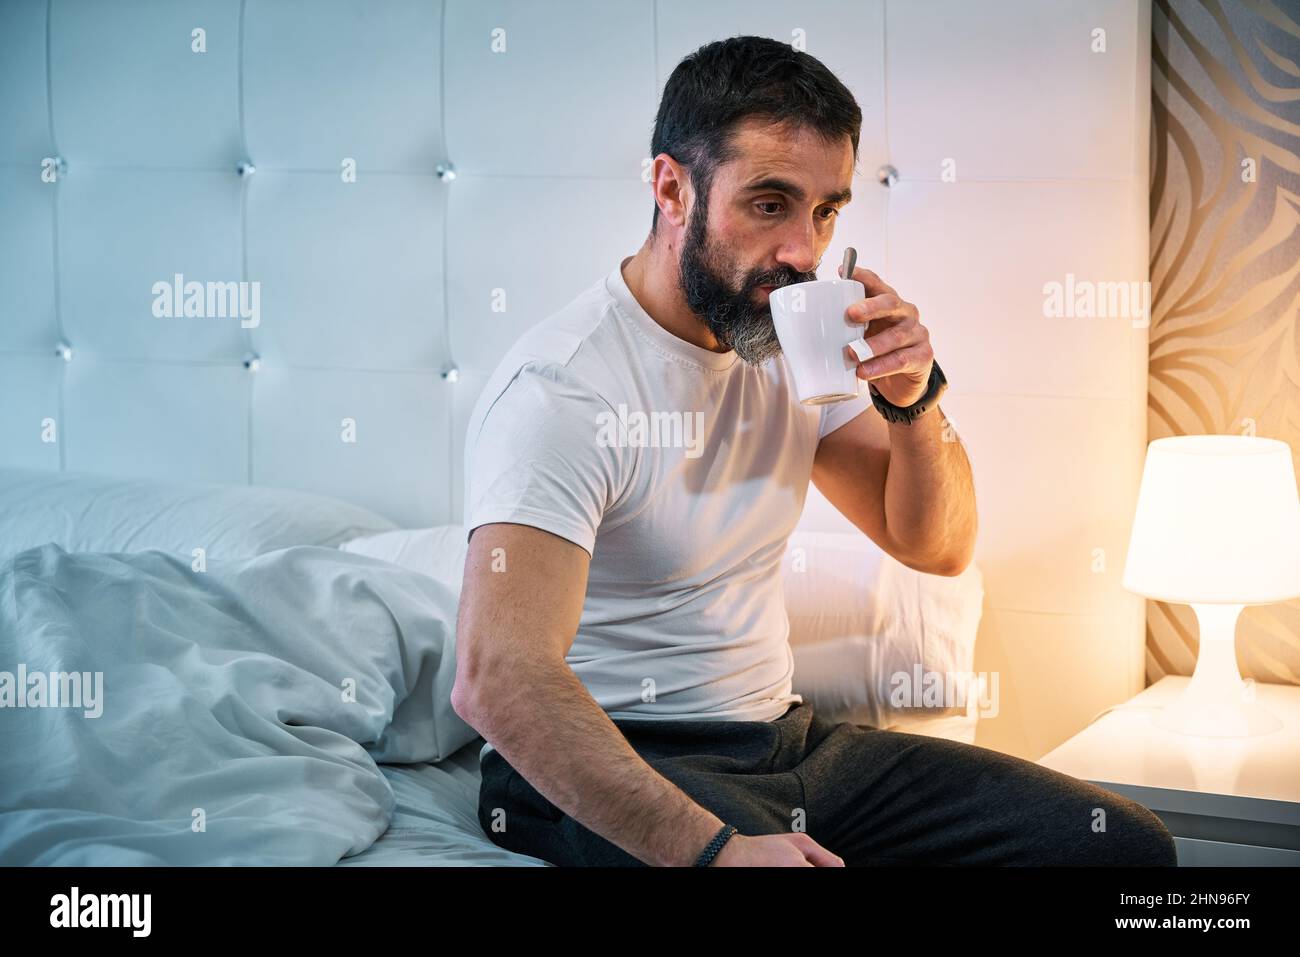 person with some kind of problem sitting on the bed and drinking from a cup Stock Photo